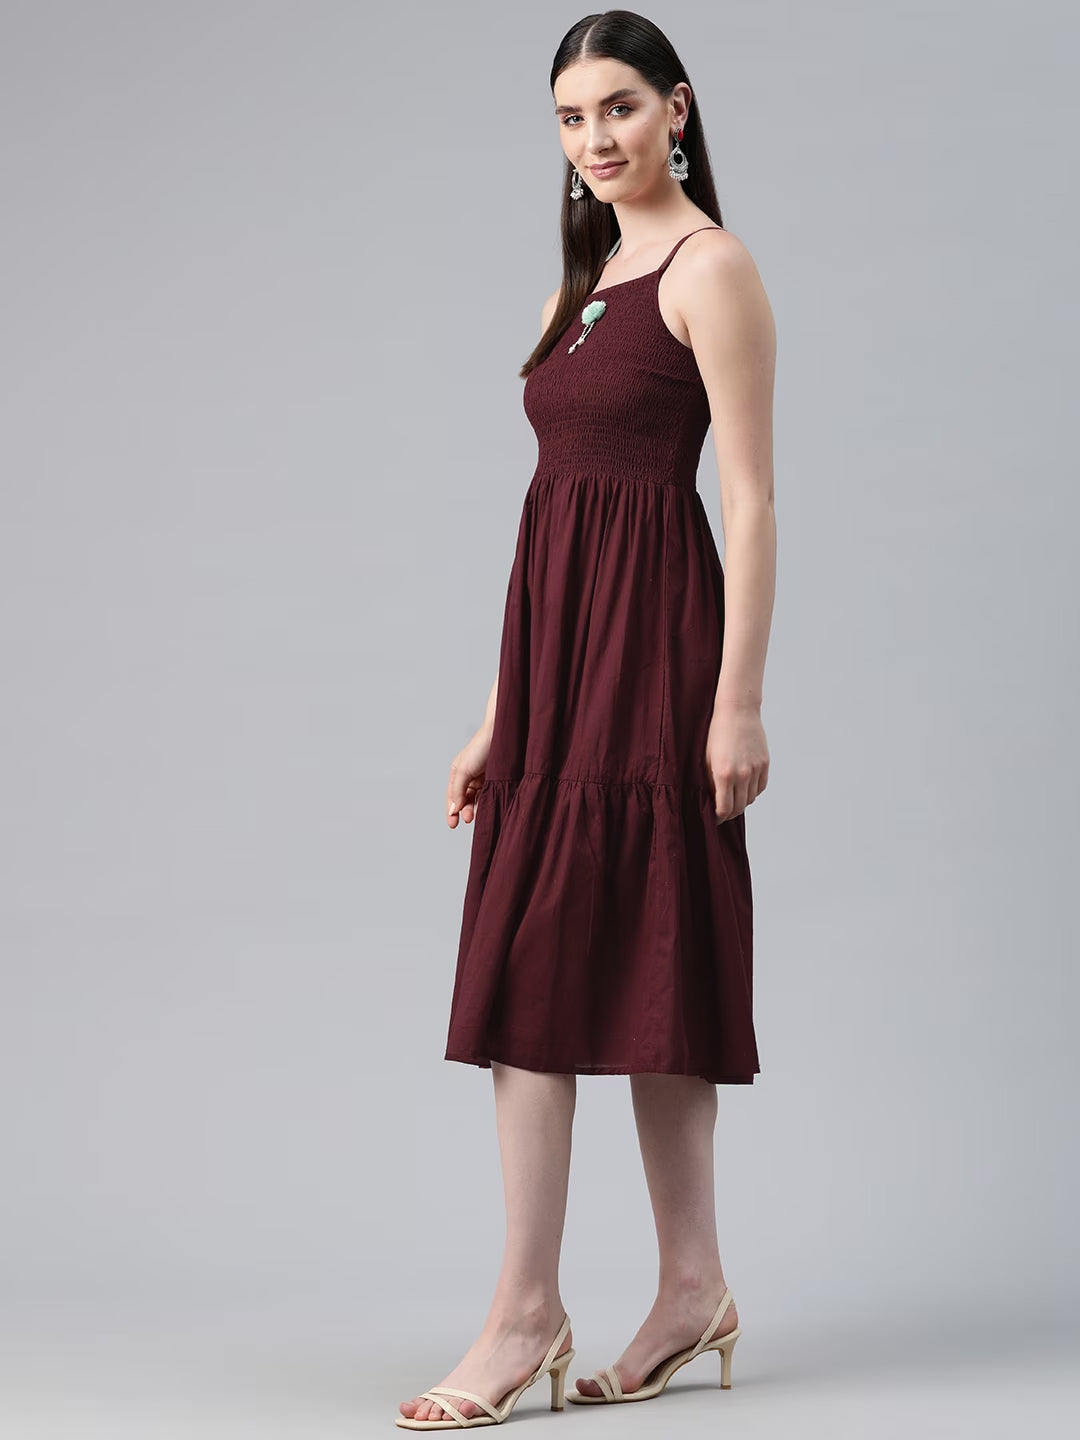 Burgundy Color Cotton Fabric Tiered Dress With Jacket